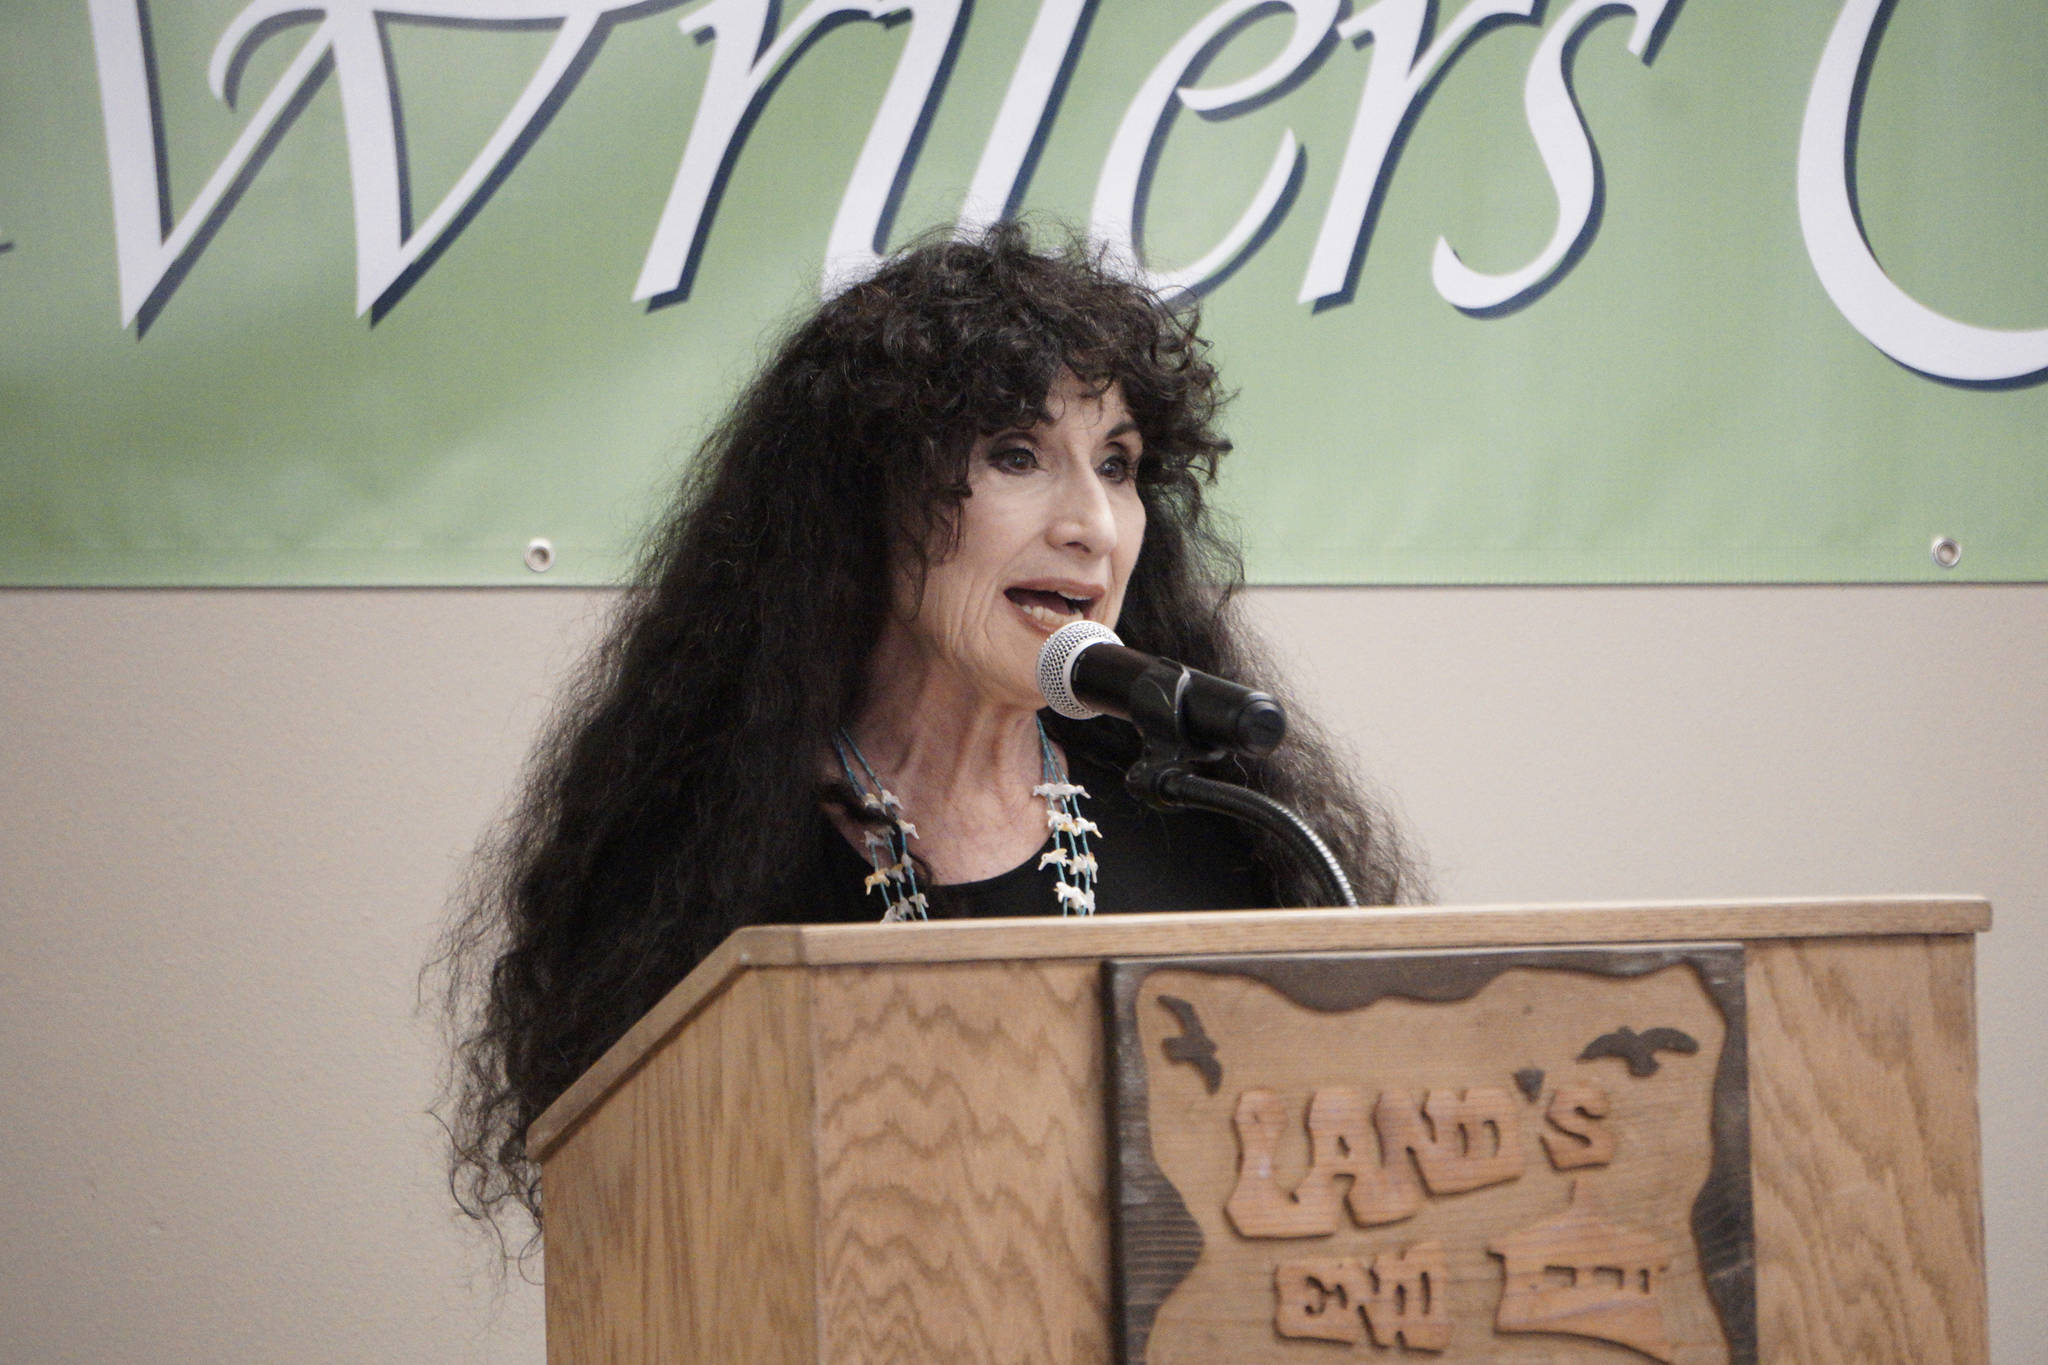 Poet and writer Diane Ackerman delivers the keynote address on June 14, 2019, at the opening of the Kachemak Bay Writers’ Conference at Land’s End Resort, Homer, Alaska. Ackerman spoke about the historical background for her book, “The Zookeeper’s Wife.” (Photo by Michael Armstrong/Homer News)